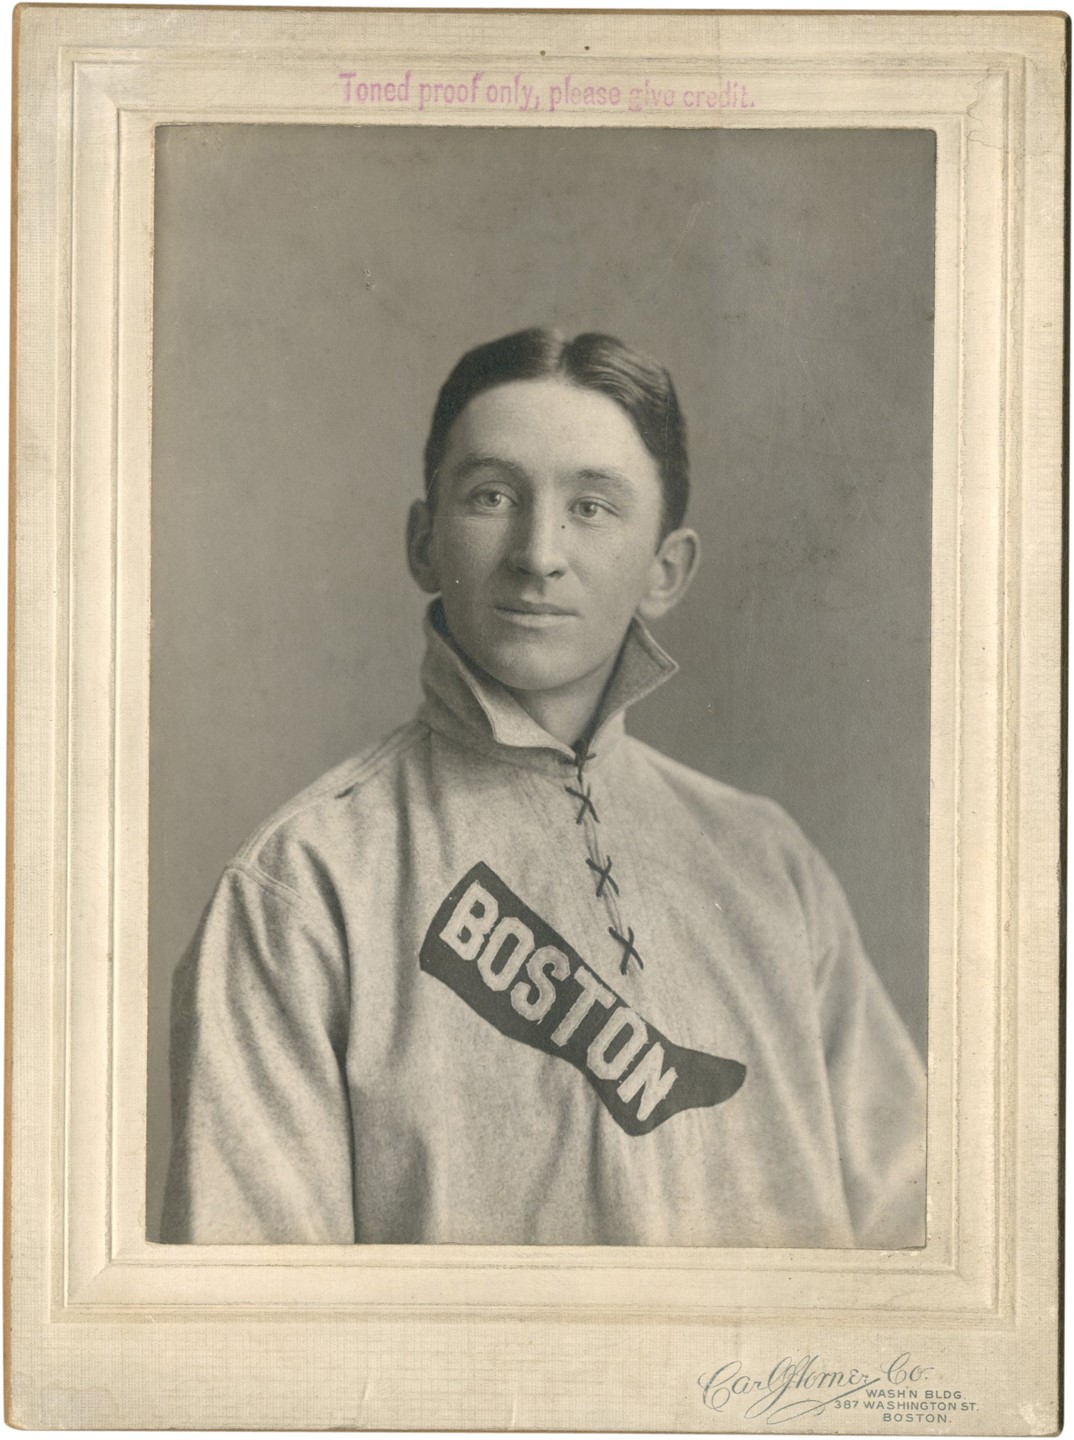 Pat Donahue Boston Red Sox Photograph by Carl Horner (Used For 1909 T204 Ramly Jiggs Donahue Card)